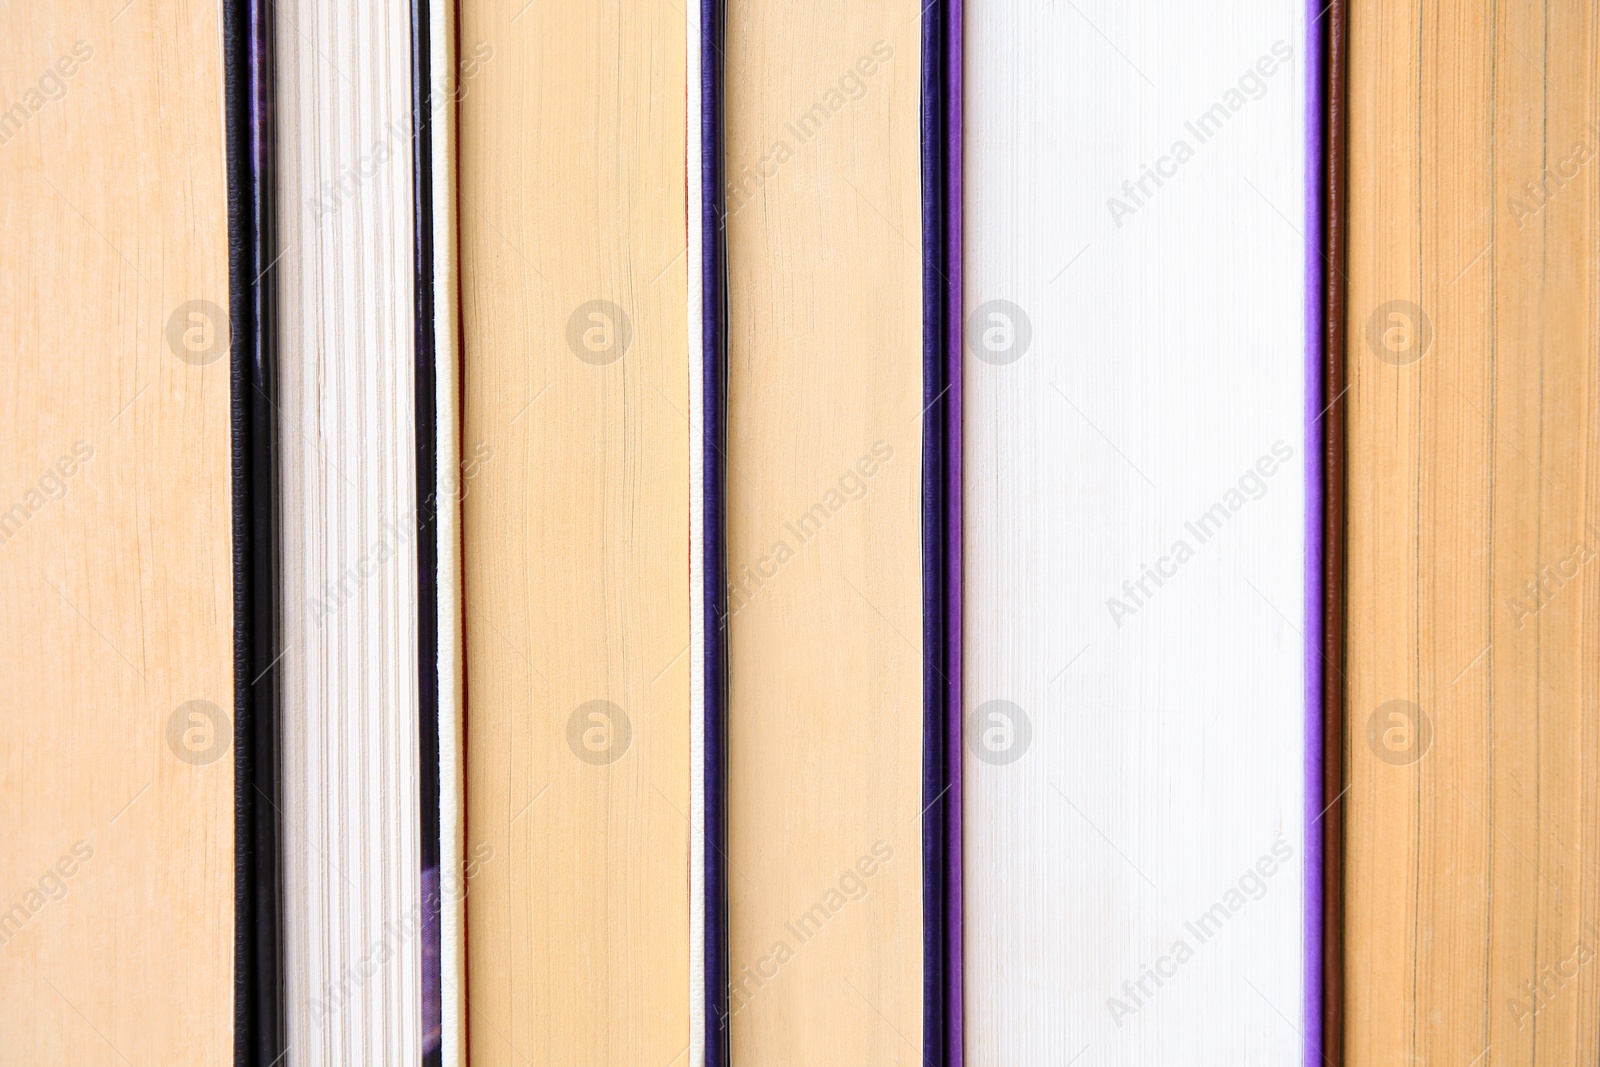 Photo of Many different books as background, closeup view